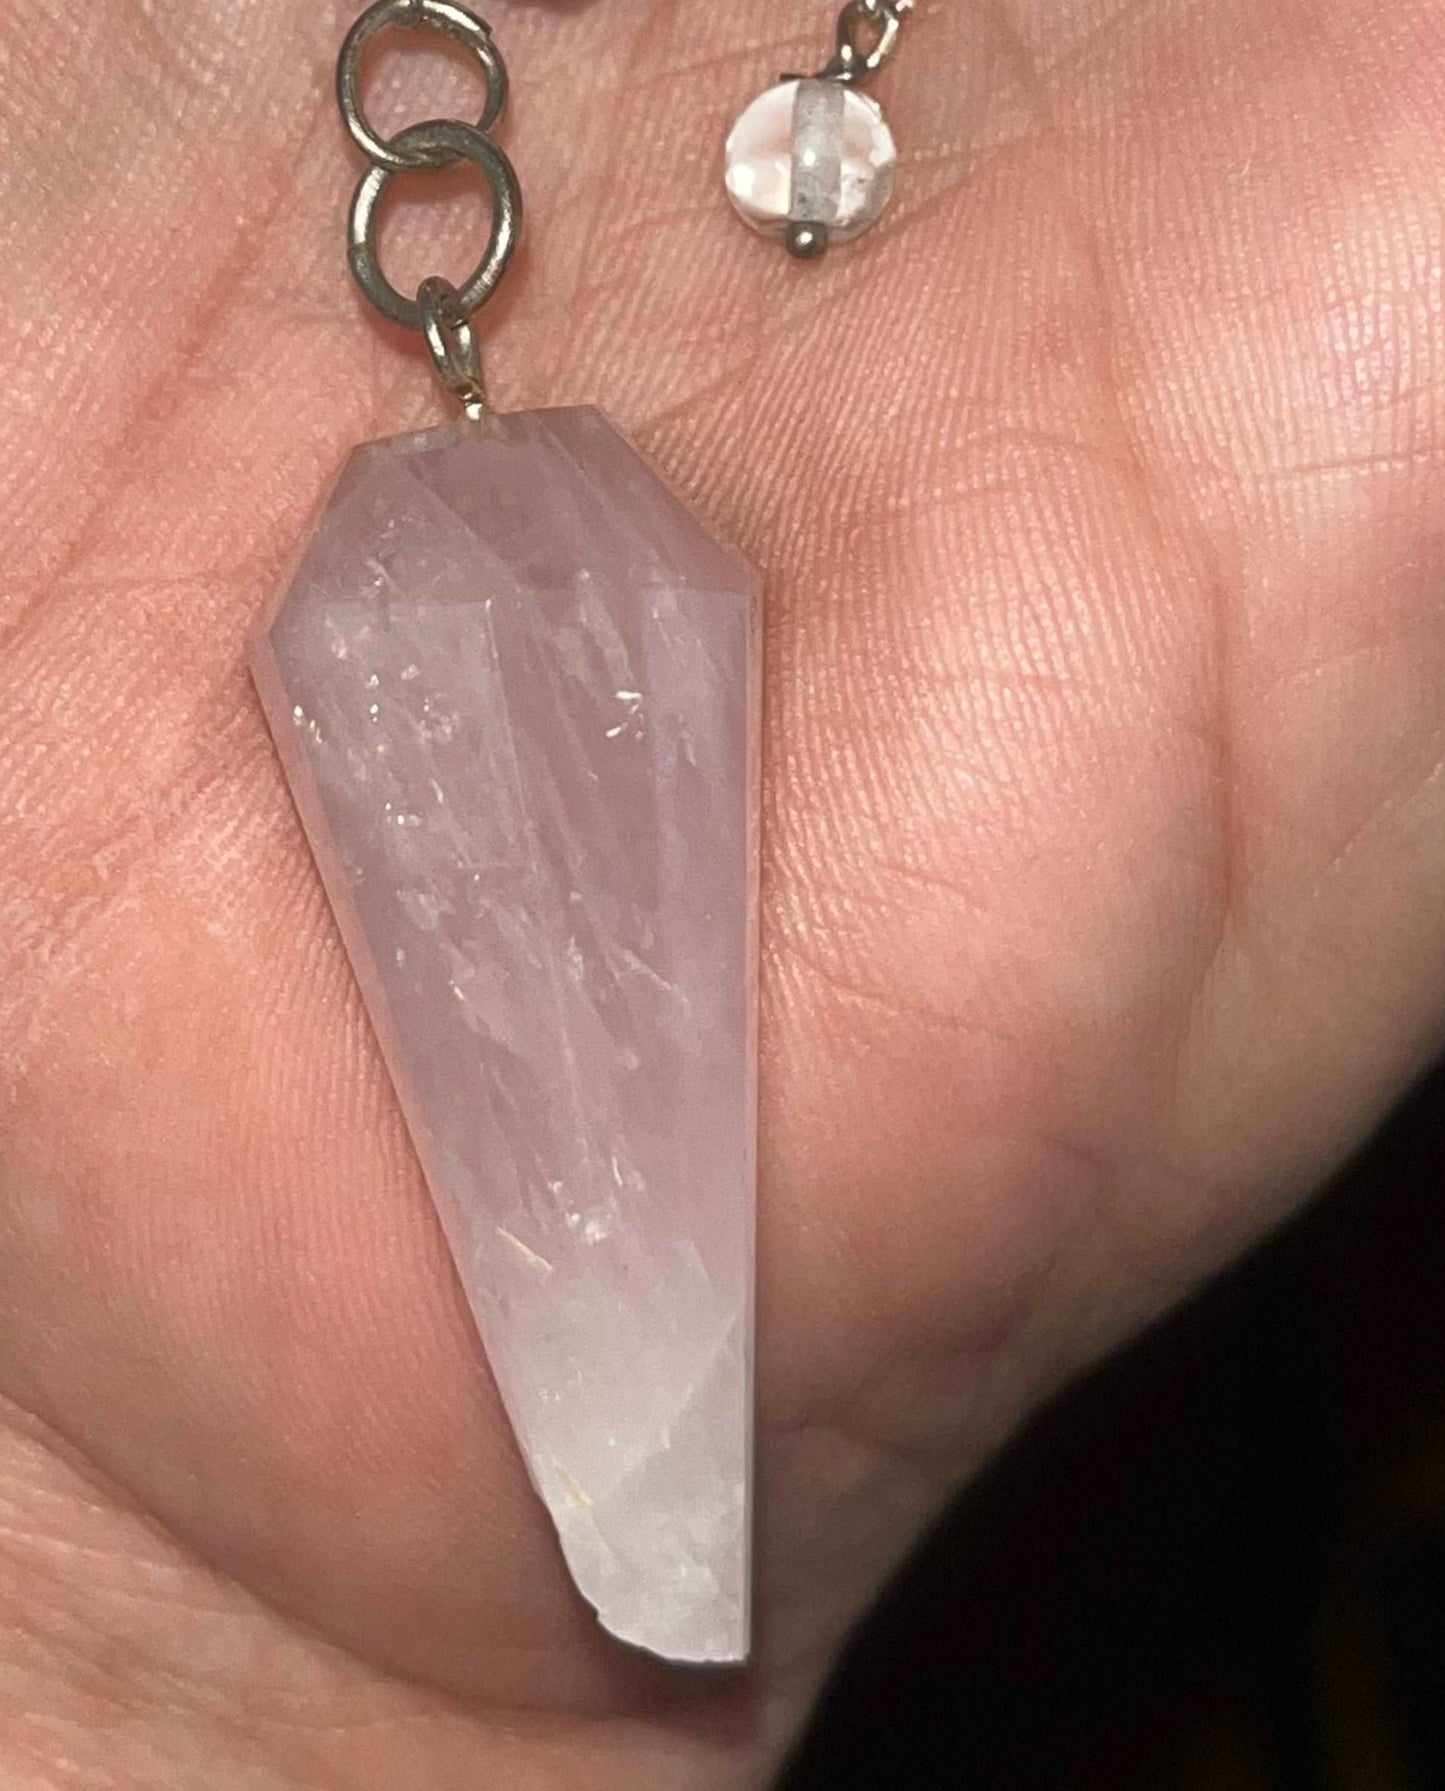 Crystal pendulums, handmade- Many options to pick from